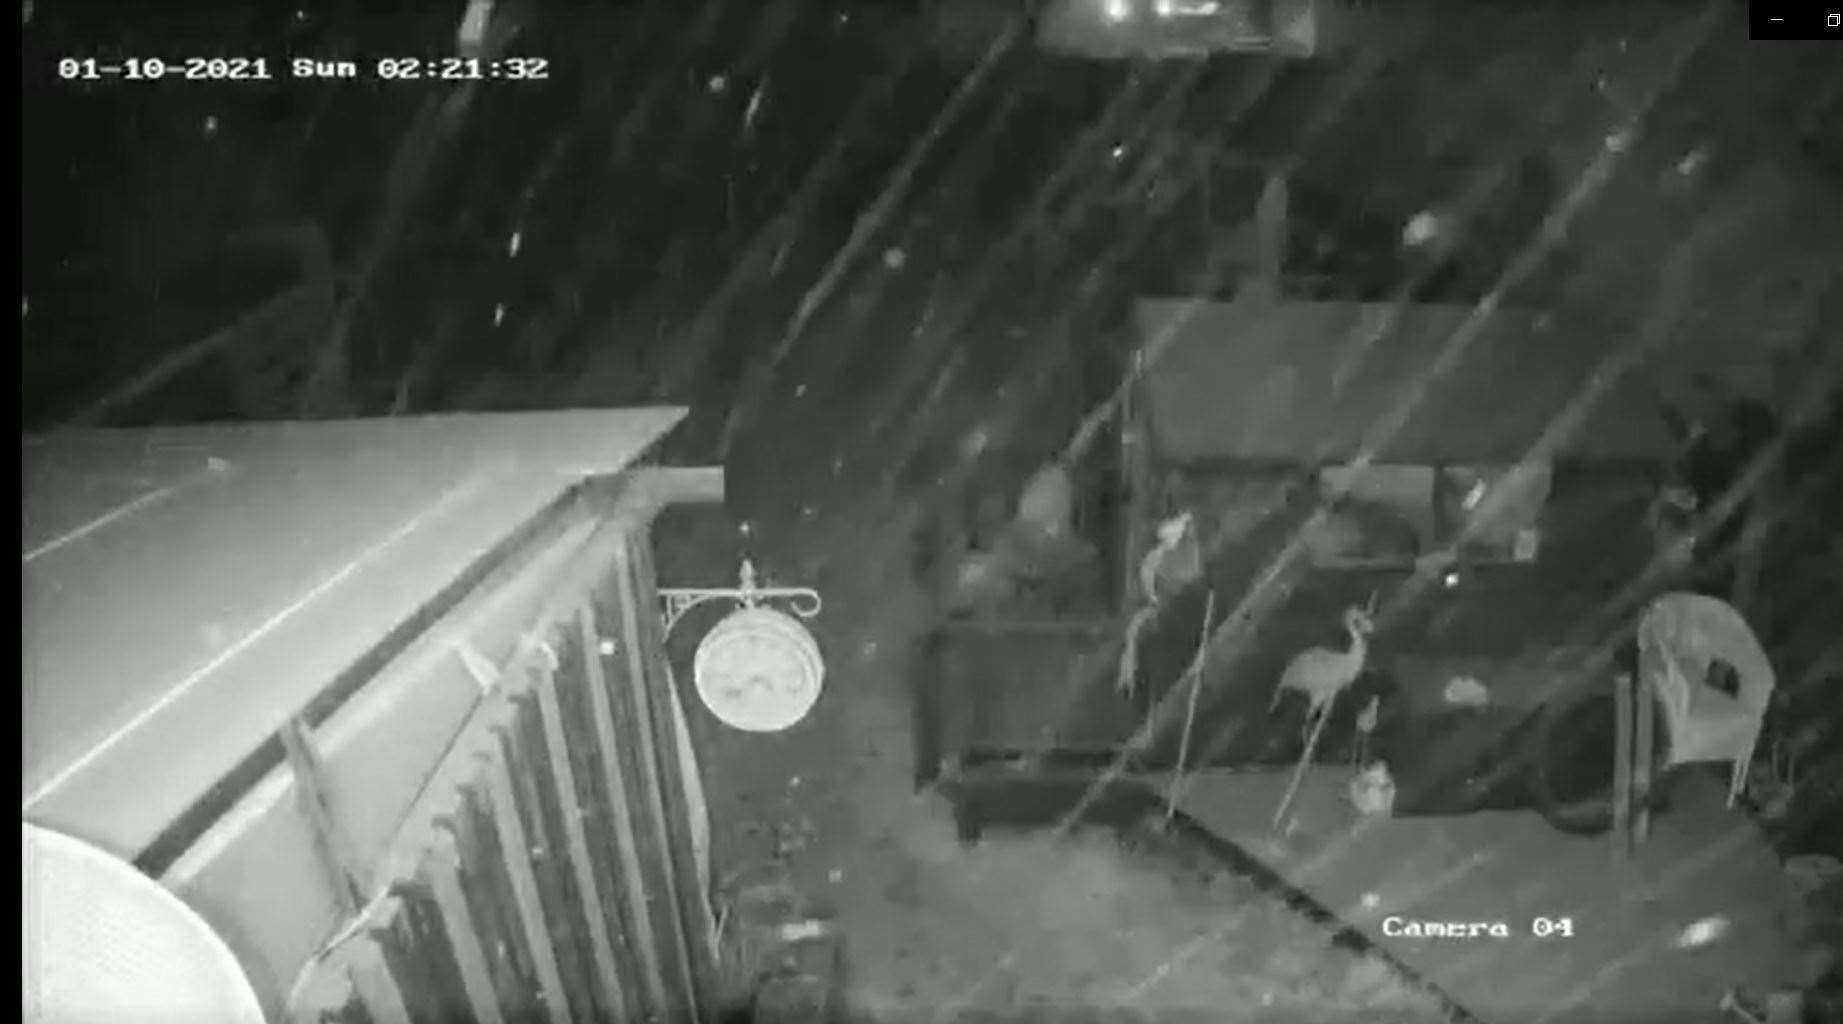 But this security video on Sheppey at 2.21am on Sunday clearly shows snow falling